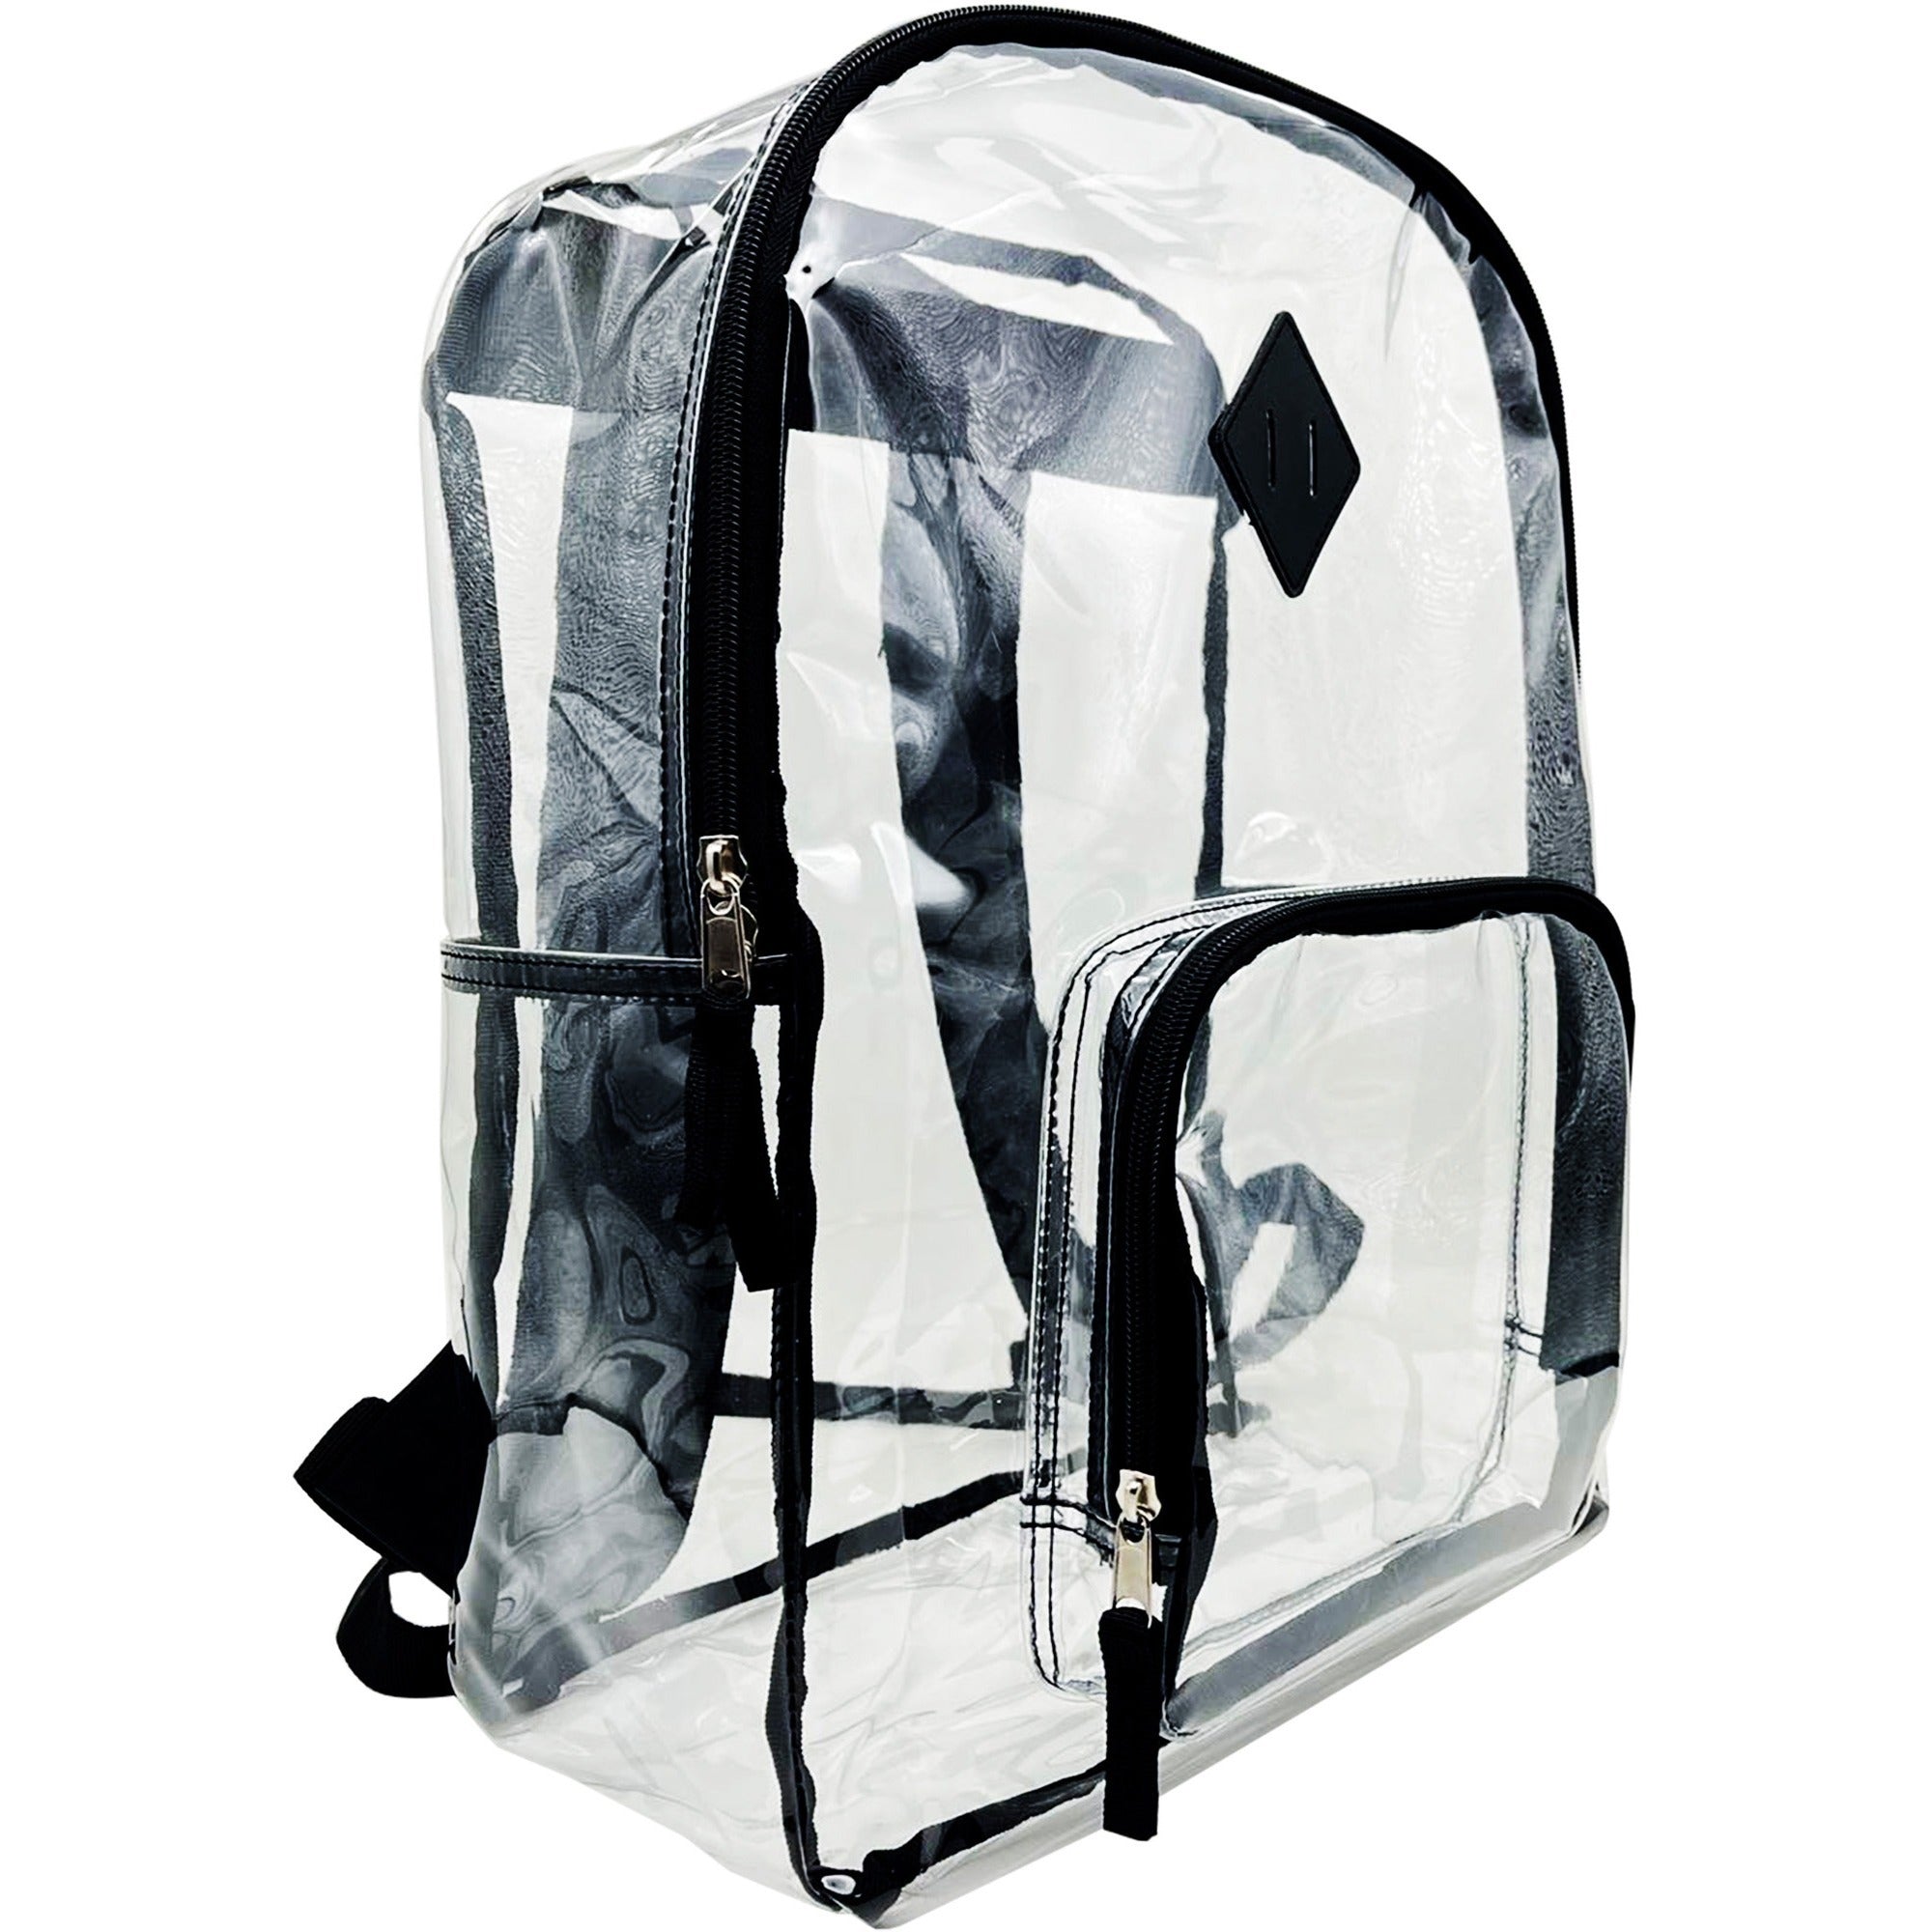 sparco-carrying-case-backpack-multipurpose-clear-polyvinyl-chloride-pvc-420d-oxford-body-shoulder-strap-handle-17-height-x-12-width-x-5-depth-1-each_spr61617 - 1